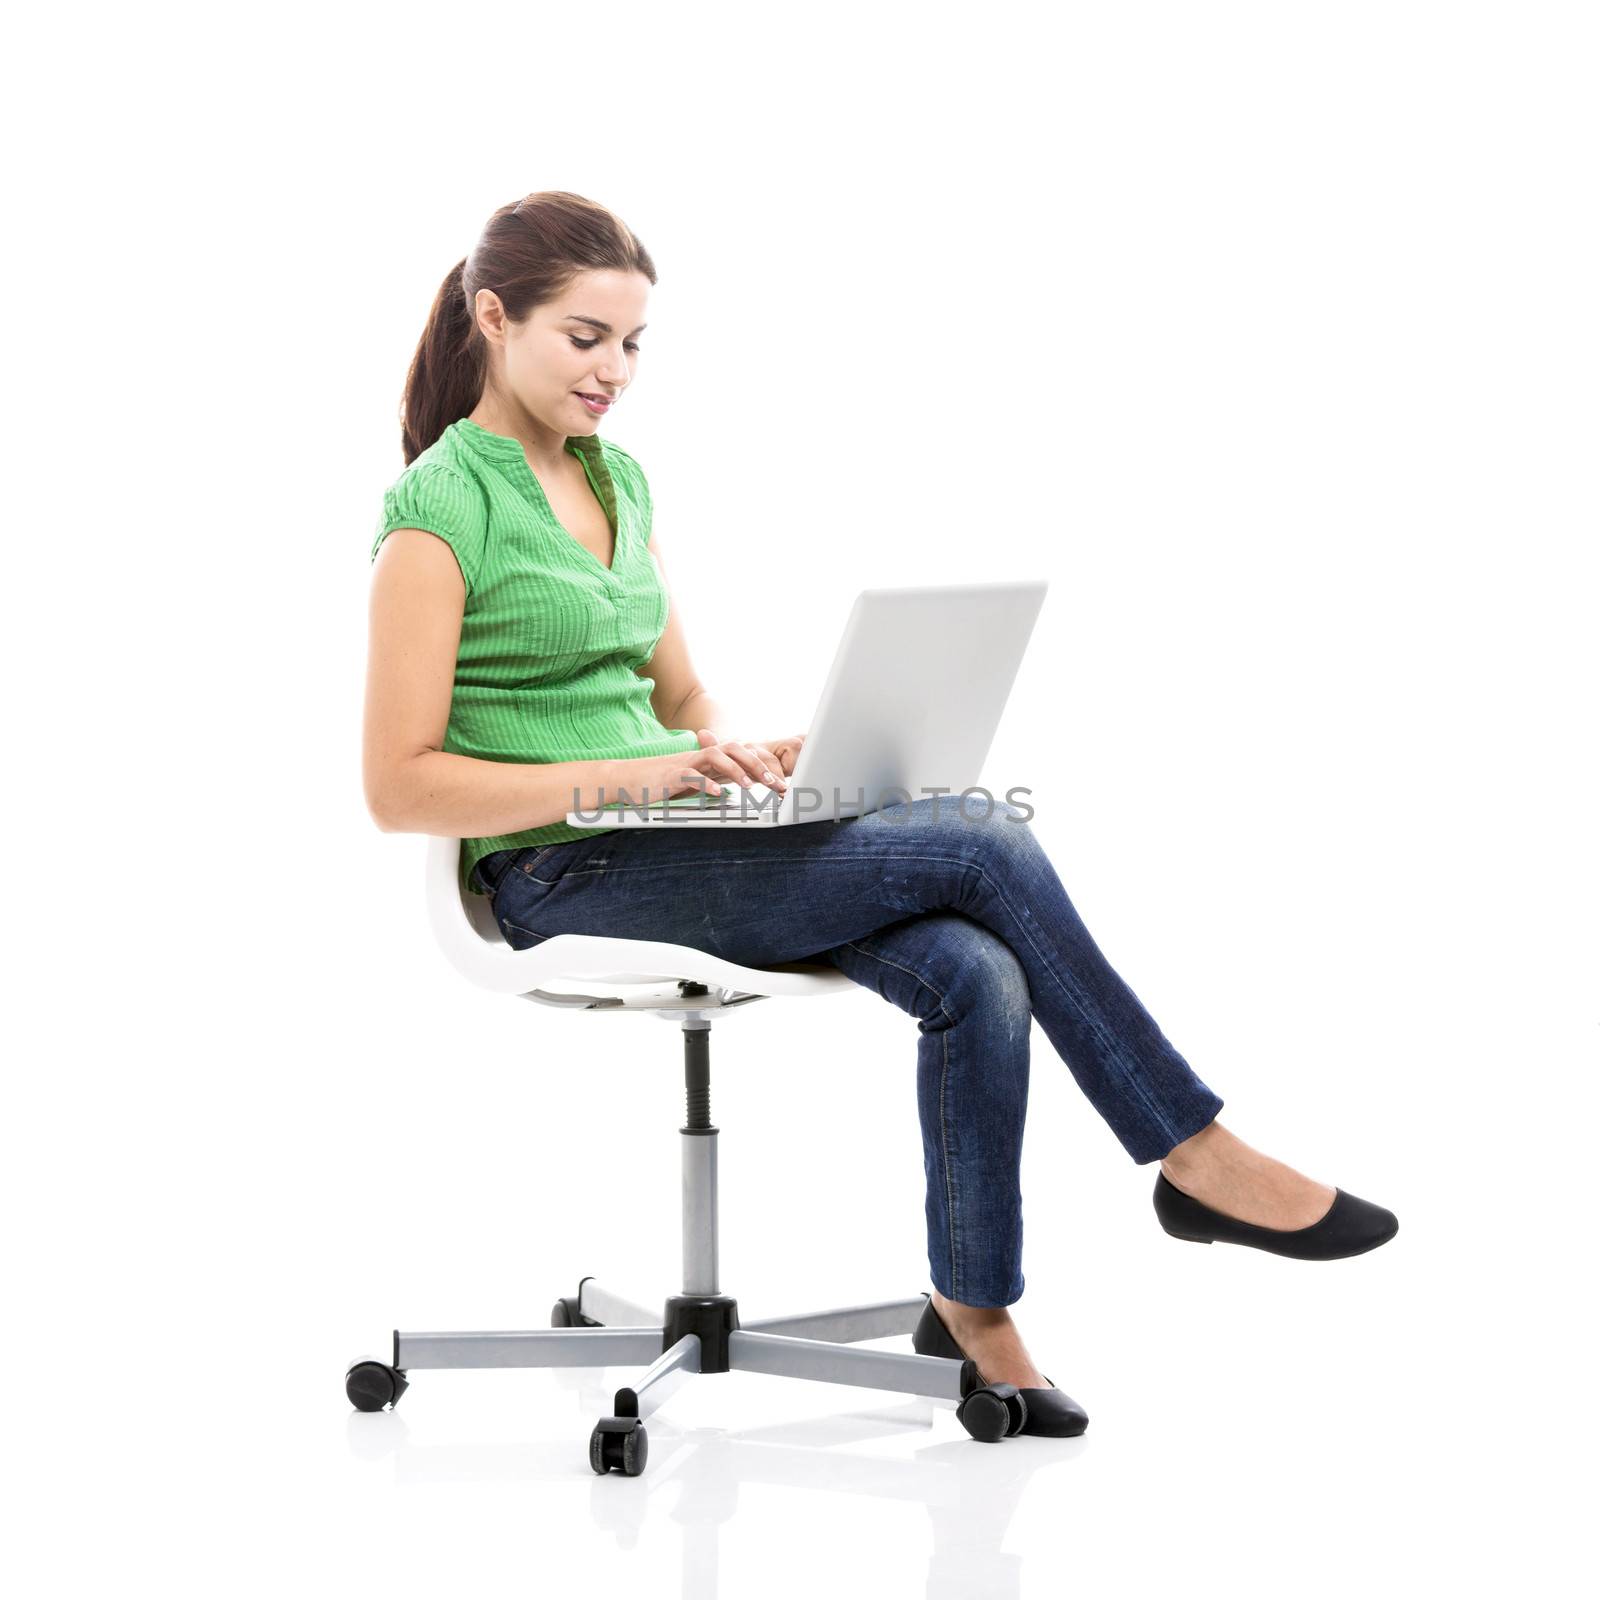 Beautiful female student sitting on a chair with a laptop, isolated over a white background